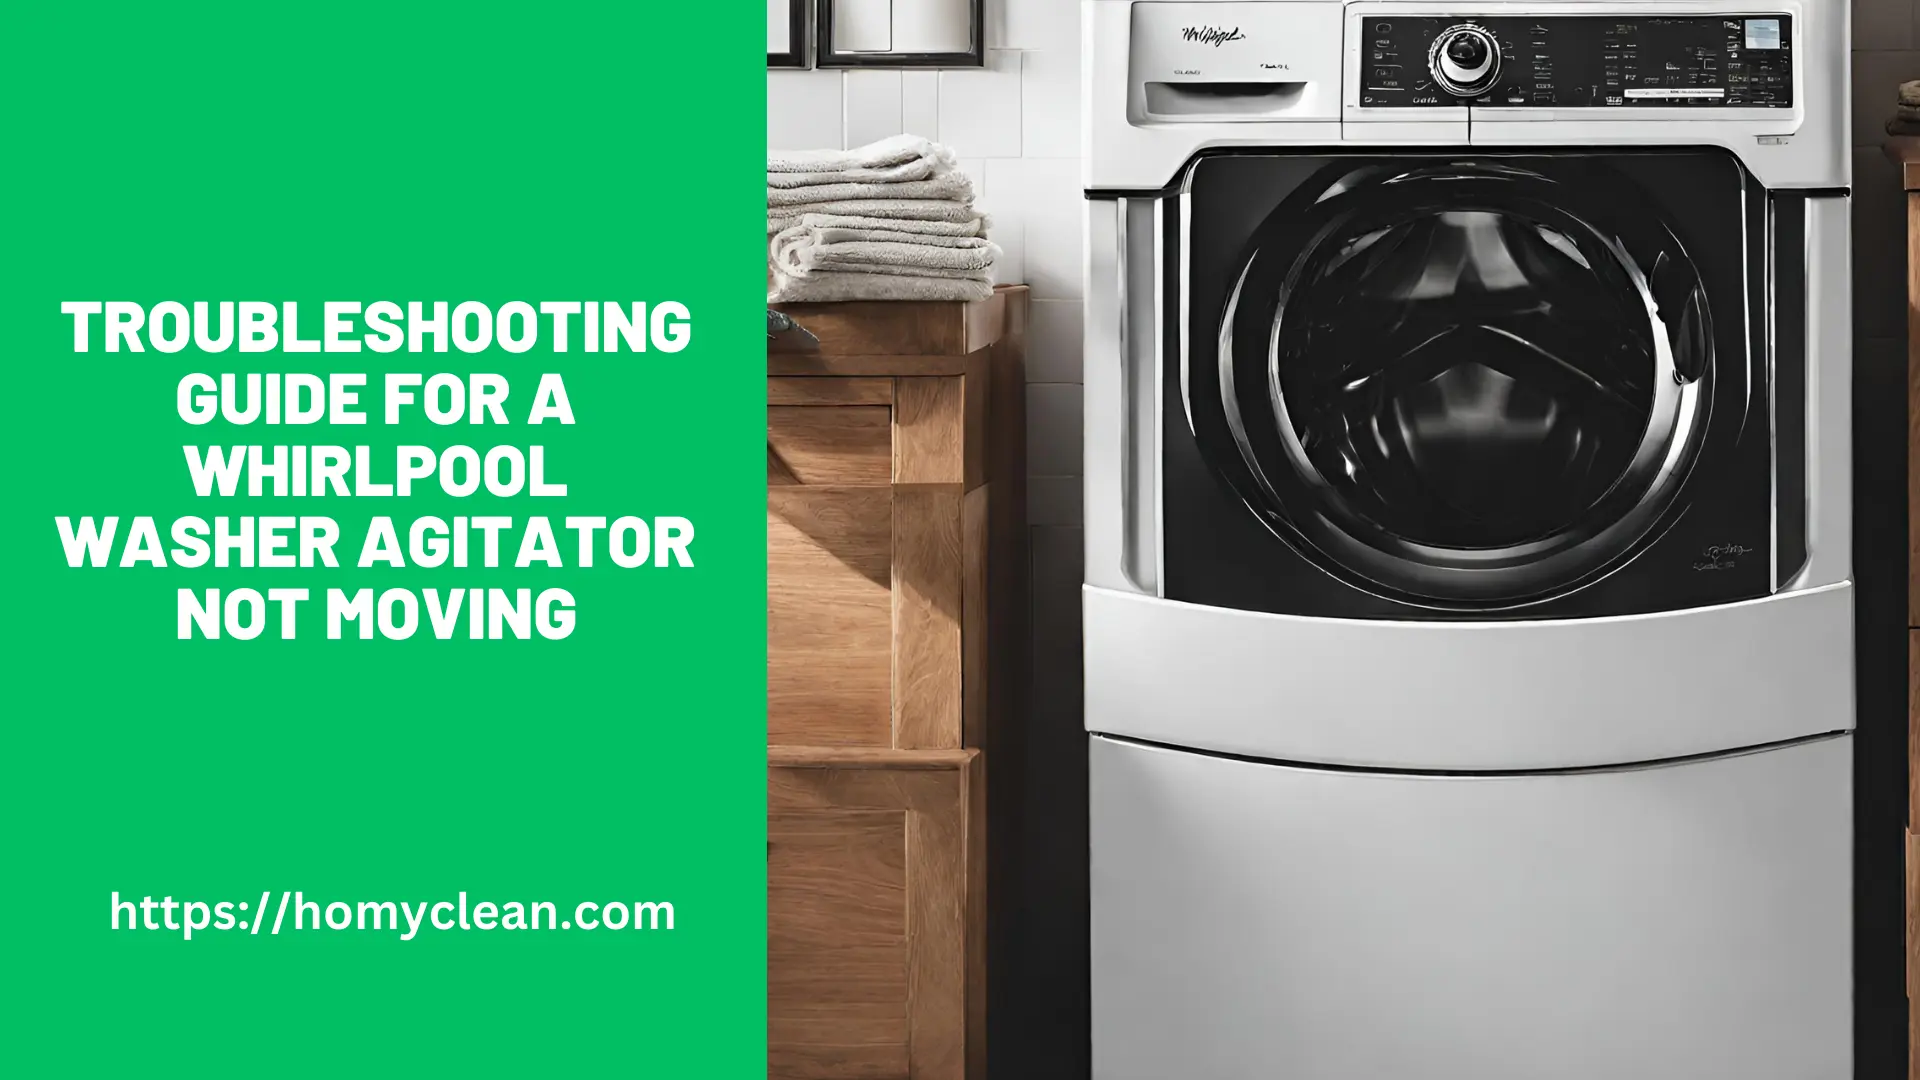 Troubleshooting Guide for a Whirlpool Washer Agitator Not Moving